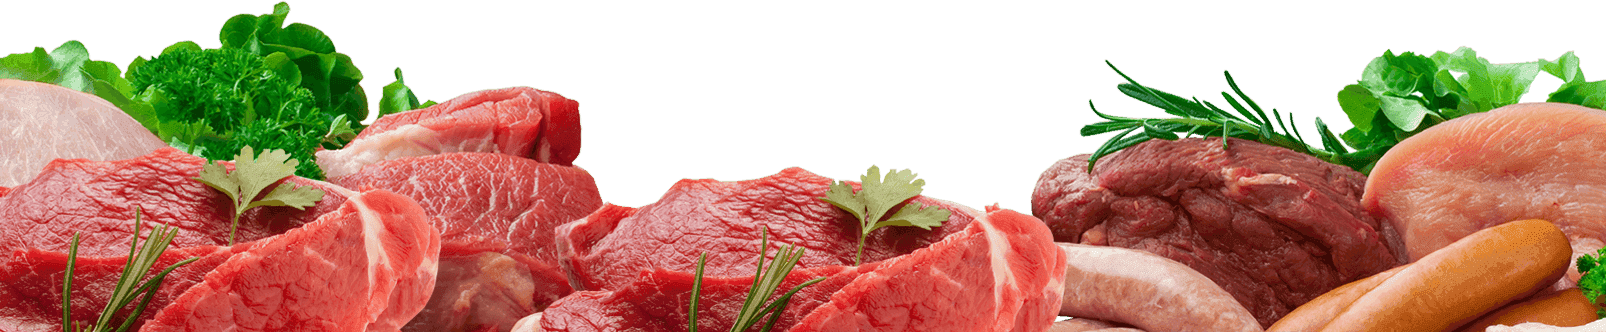 Red Meat Cliparts Free Downlo